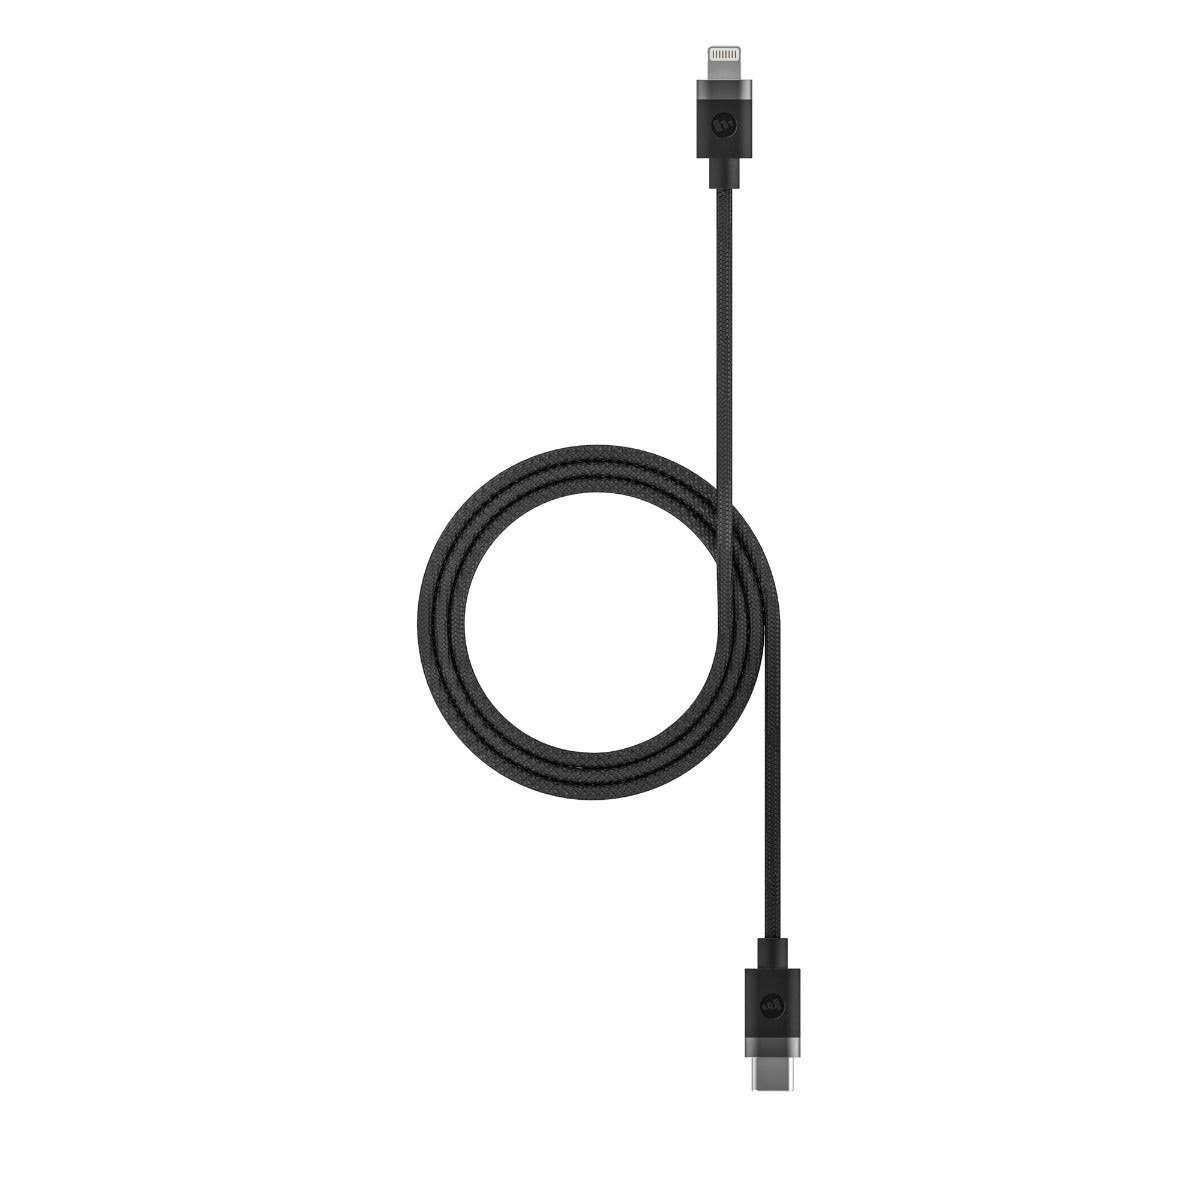 Mophie USB-A Cable with Lightning Connector (Black | 3m)